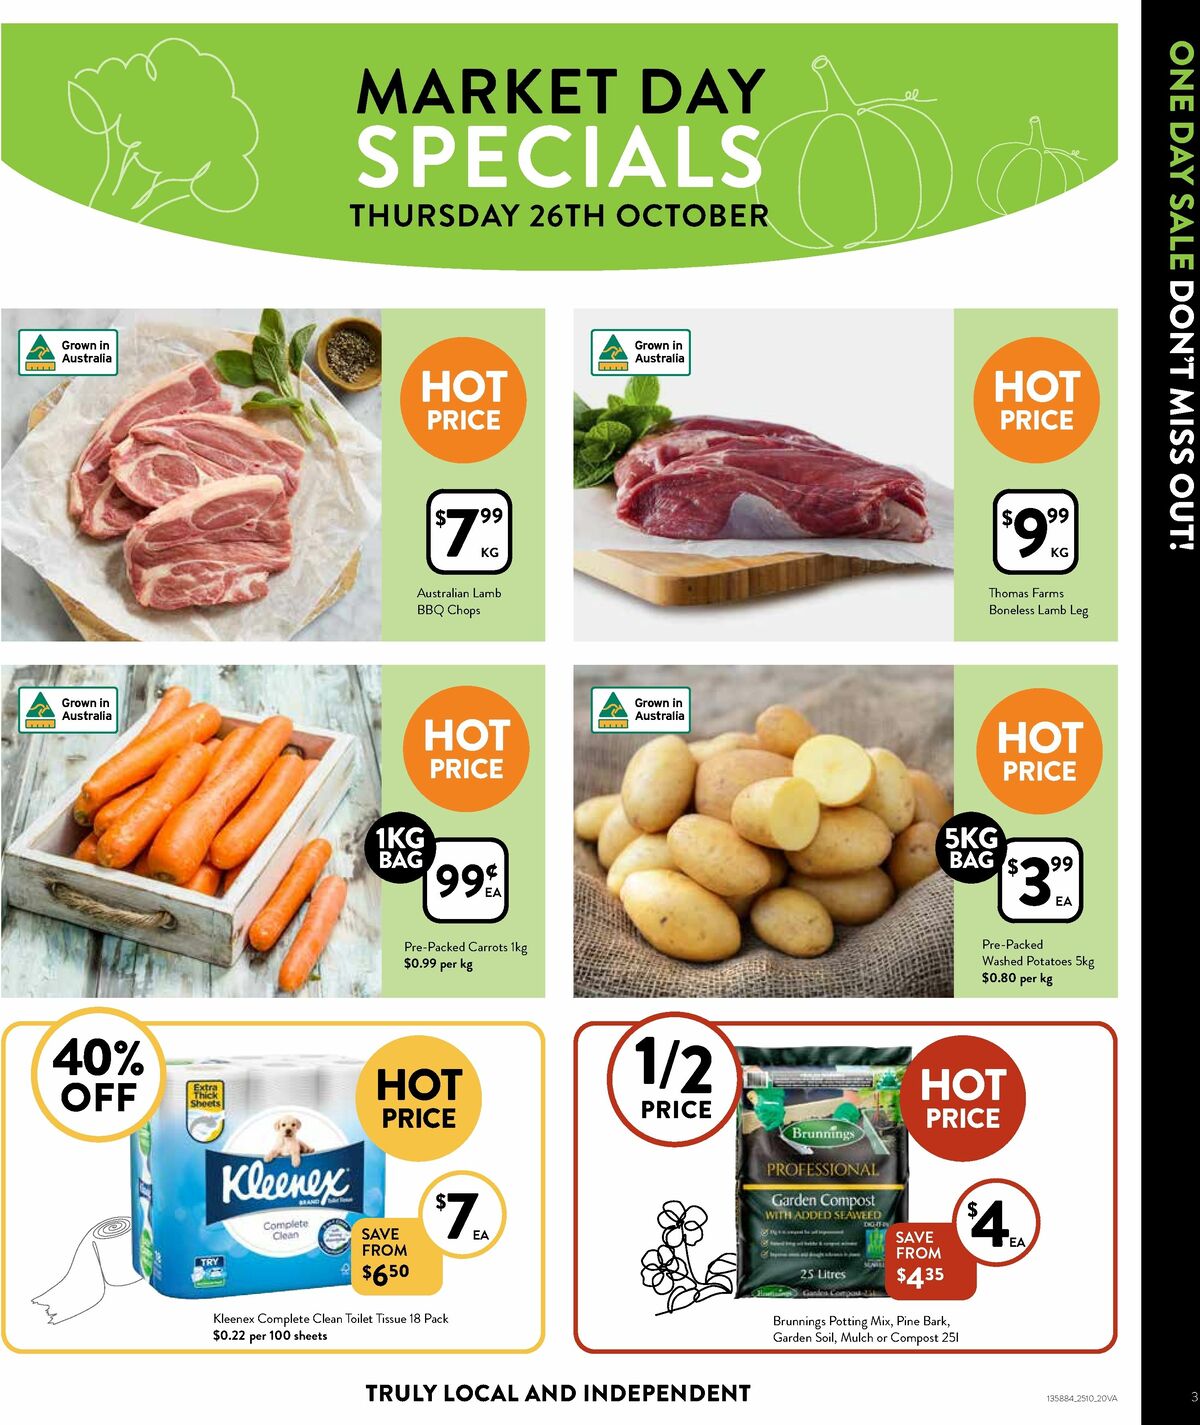 FoodWorks Supermarket Catalogues from 25 October